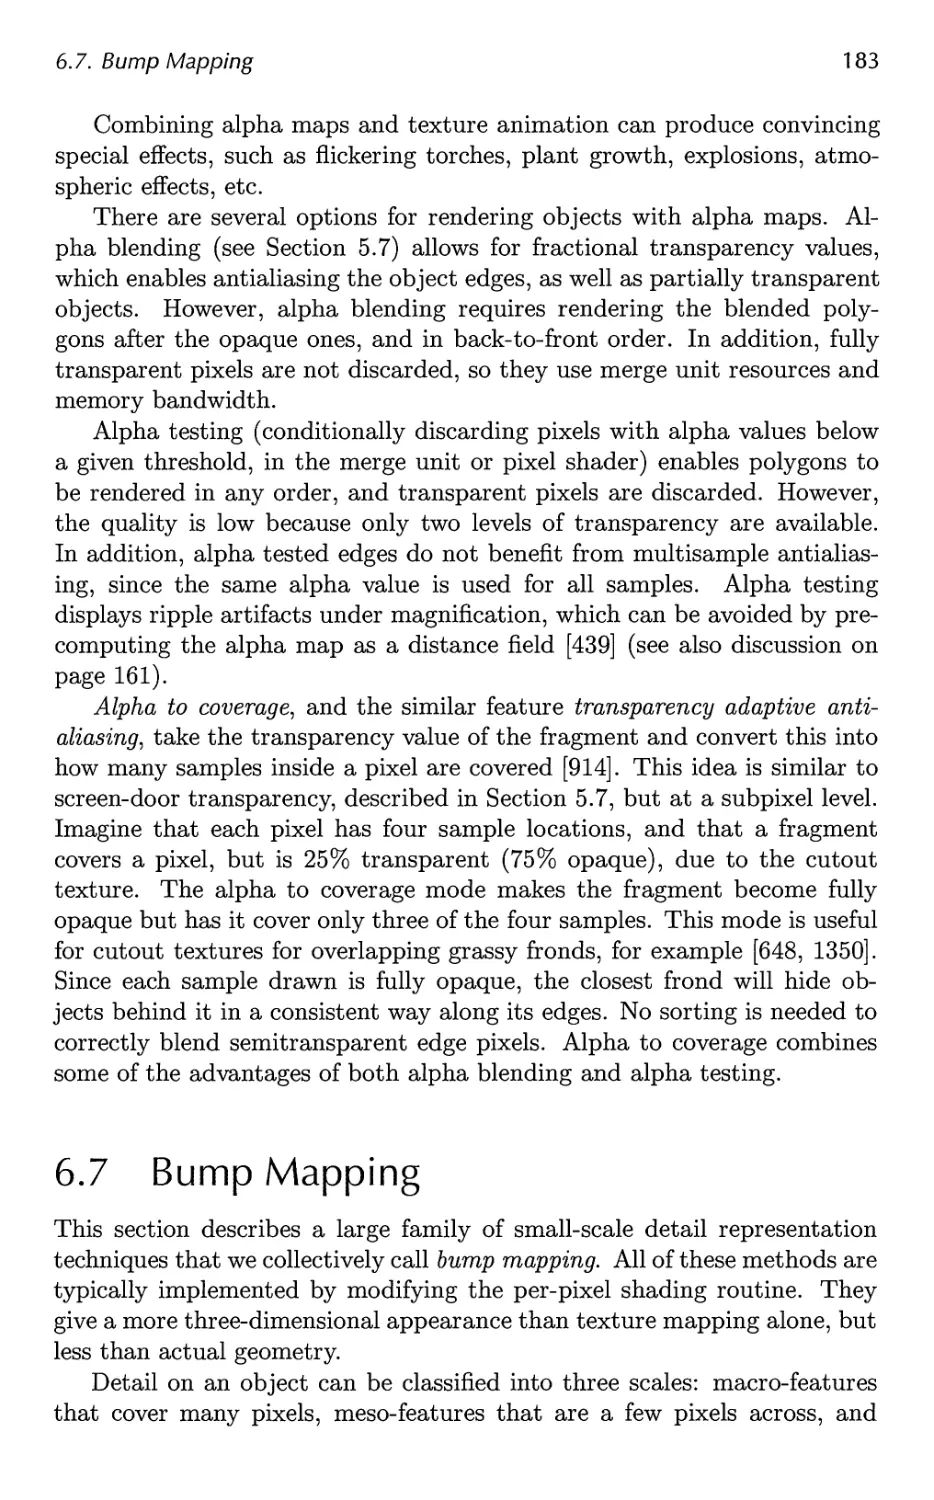 6.7 Bump Mapping